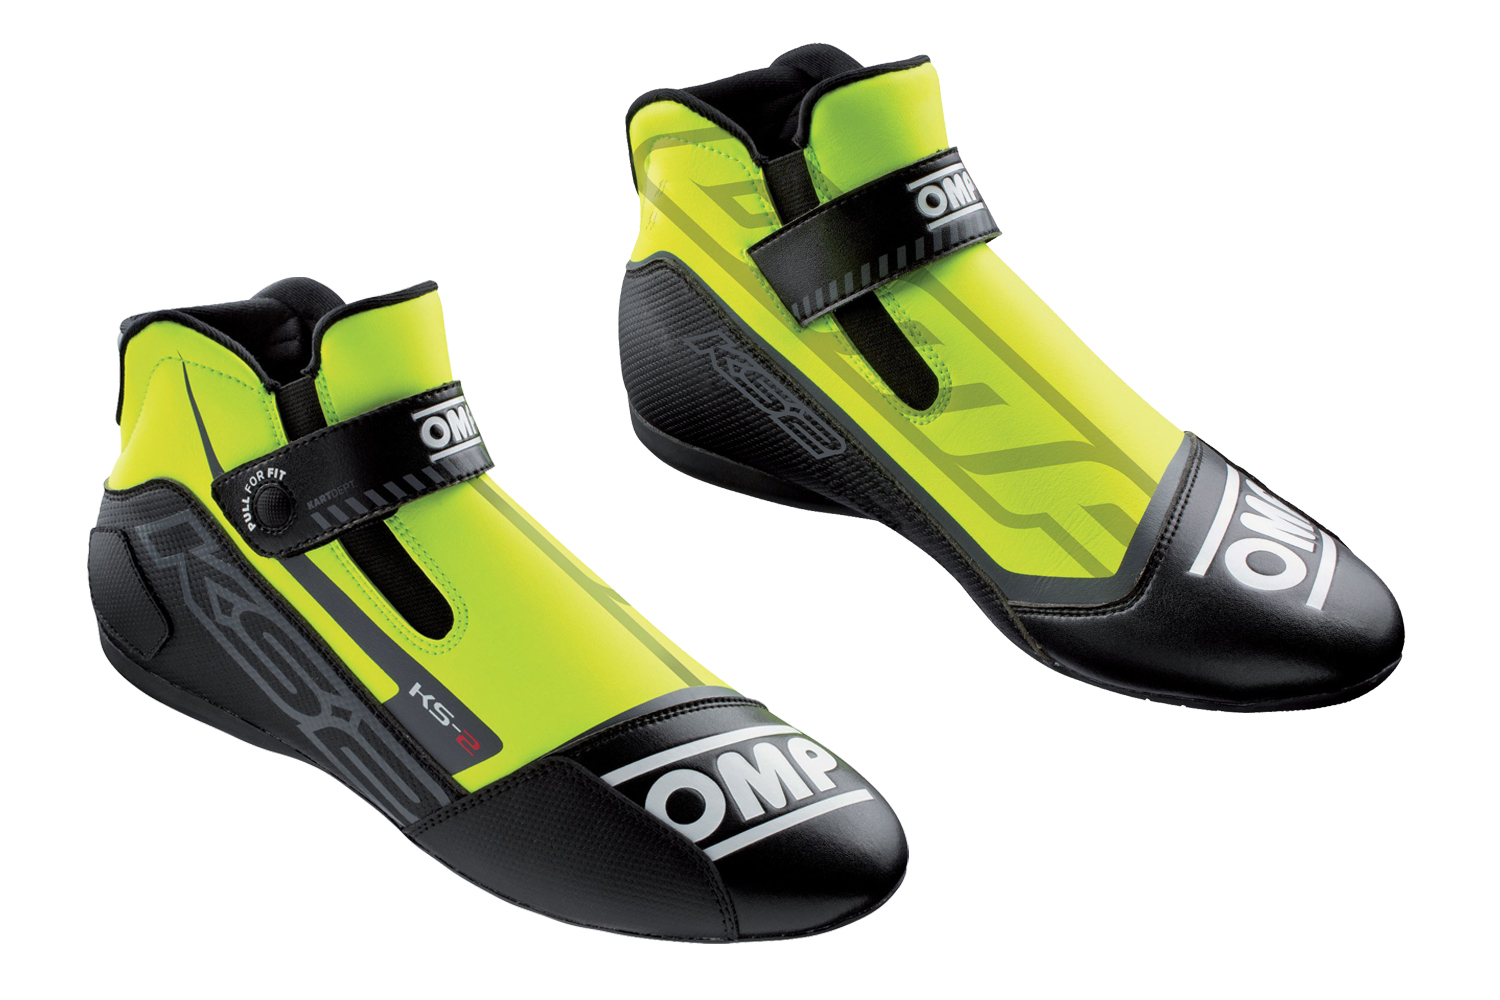 OMP Racing IC82505938 - Shoe, KS-2, Driving, Mid-Top, FIA Approved, Suede Leather Outer, Fire Retardant Fabric Inner, Fluorescent Yellow / Black, Euro Size 38, Pair